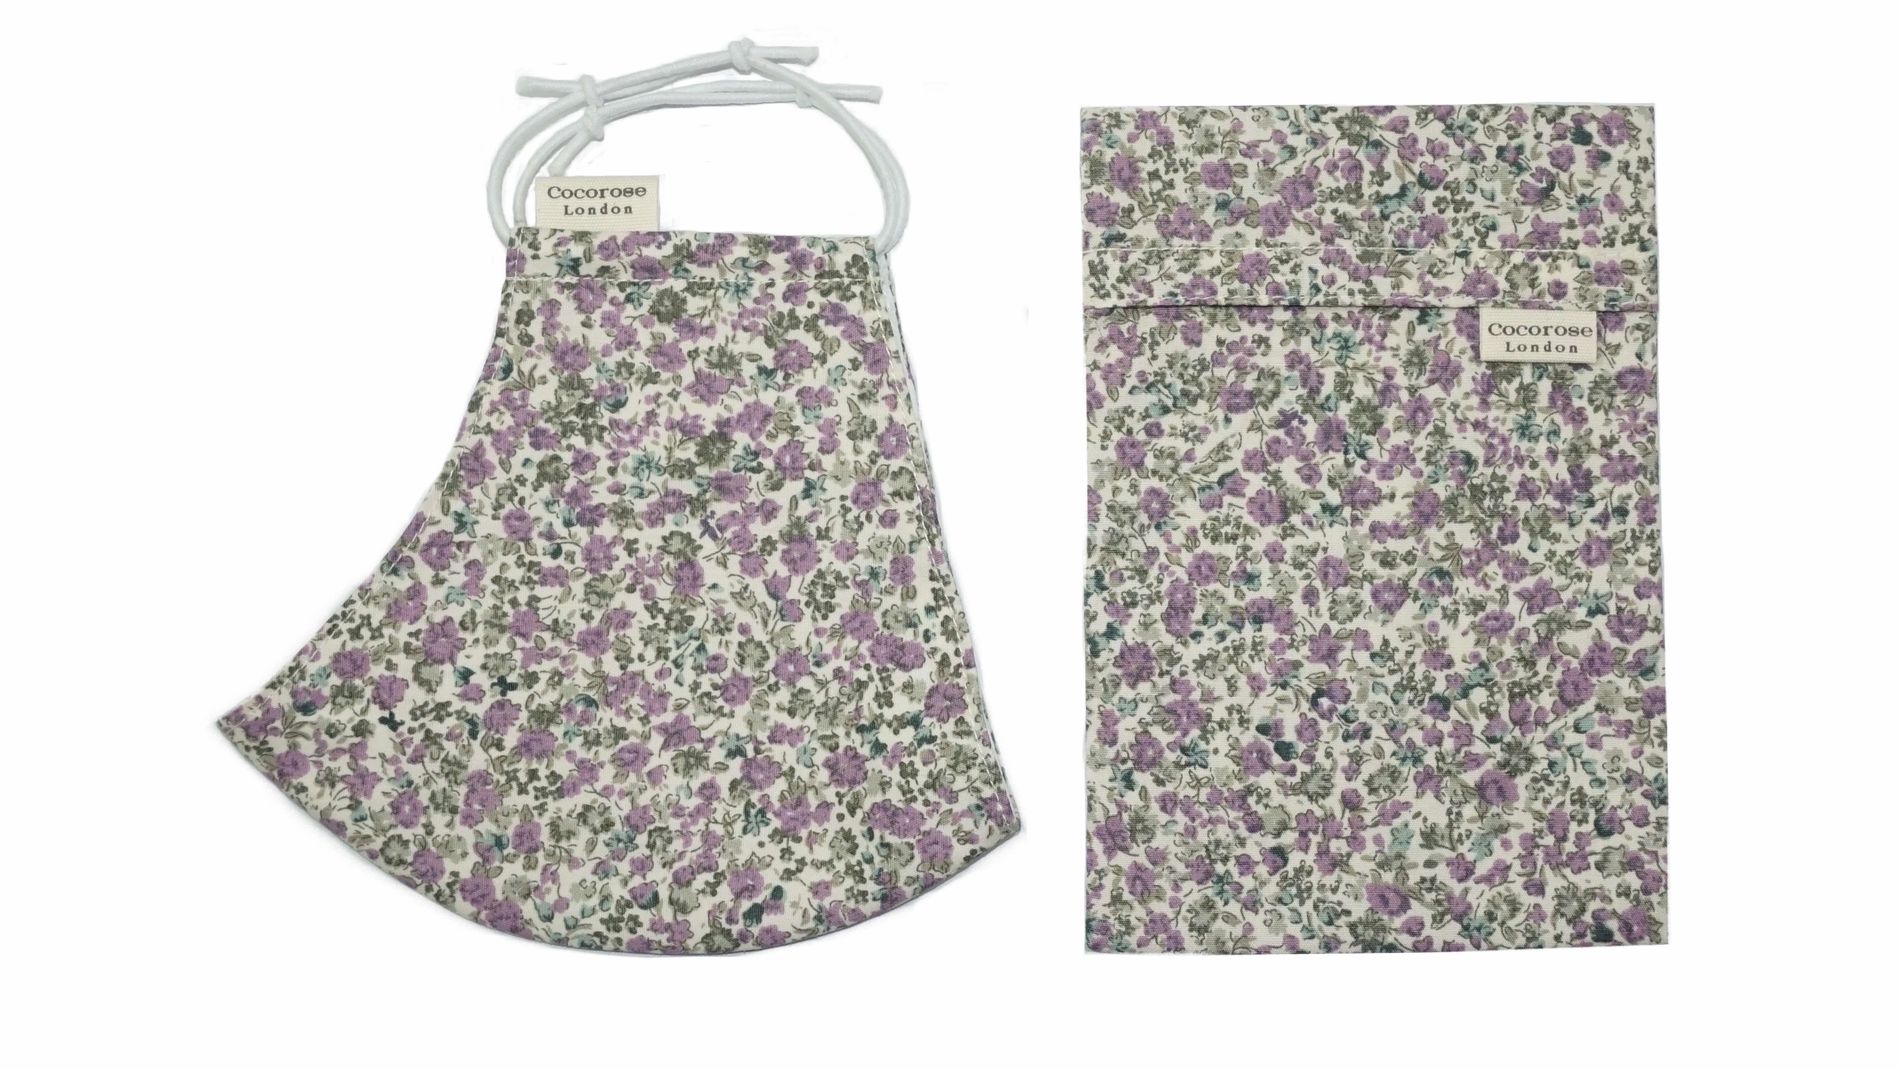 Laura Lavender cotton ditsy print floral fitted face mask from Cocorose London